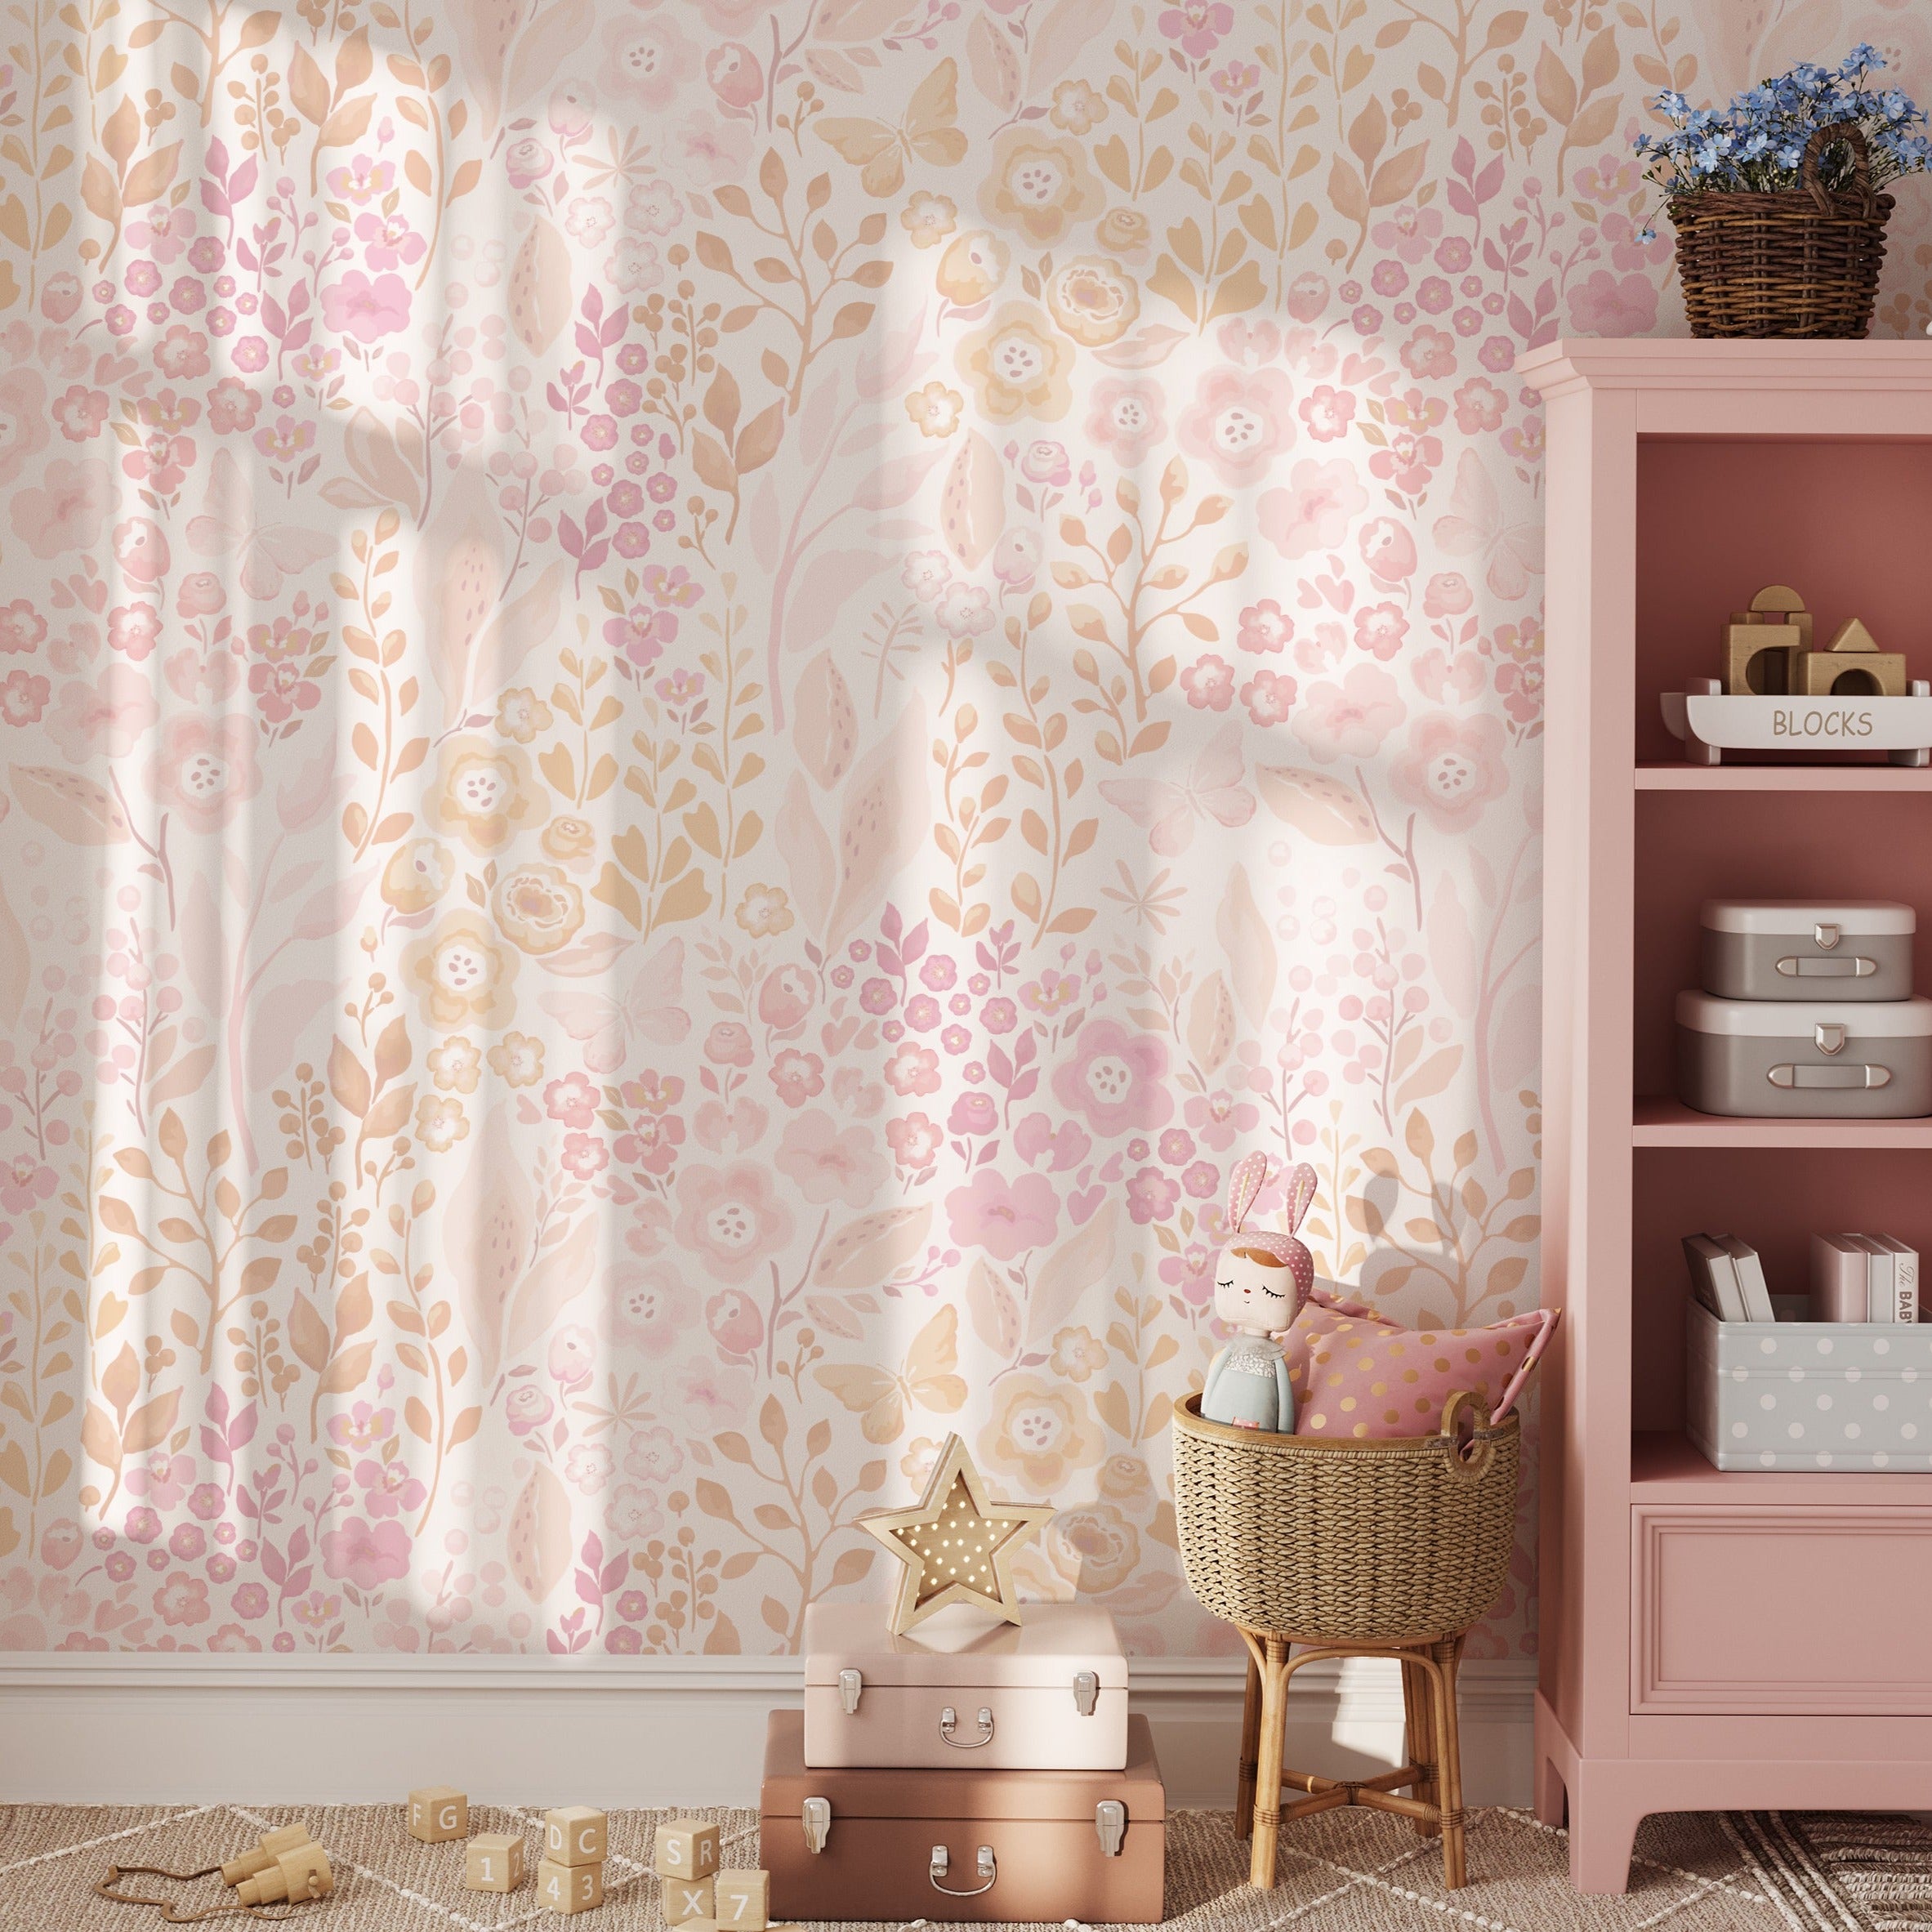 A cozy nursery corner graced with the 'Pretty Petals Wallpaper', providing a dreamy and tender setting for a child's room. The soft wallpaper pattern complements the pink shelving, plush toys, and star-shaped decor, creating a whimsical space for little ones.